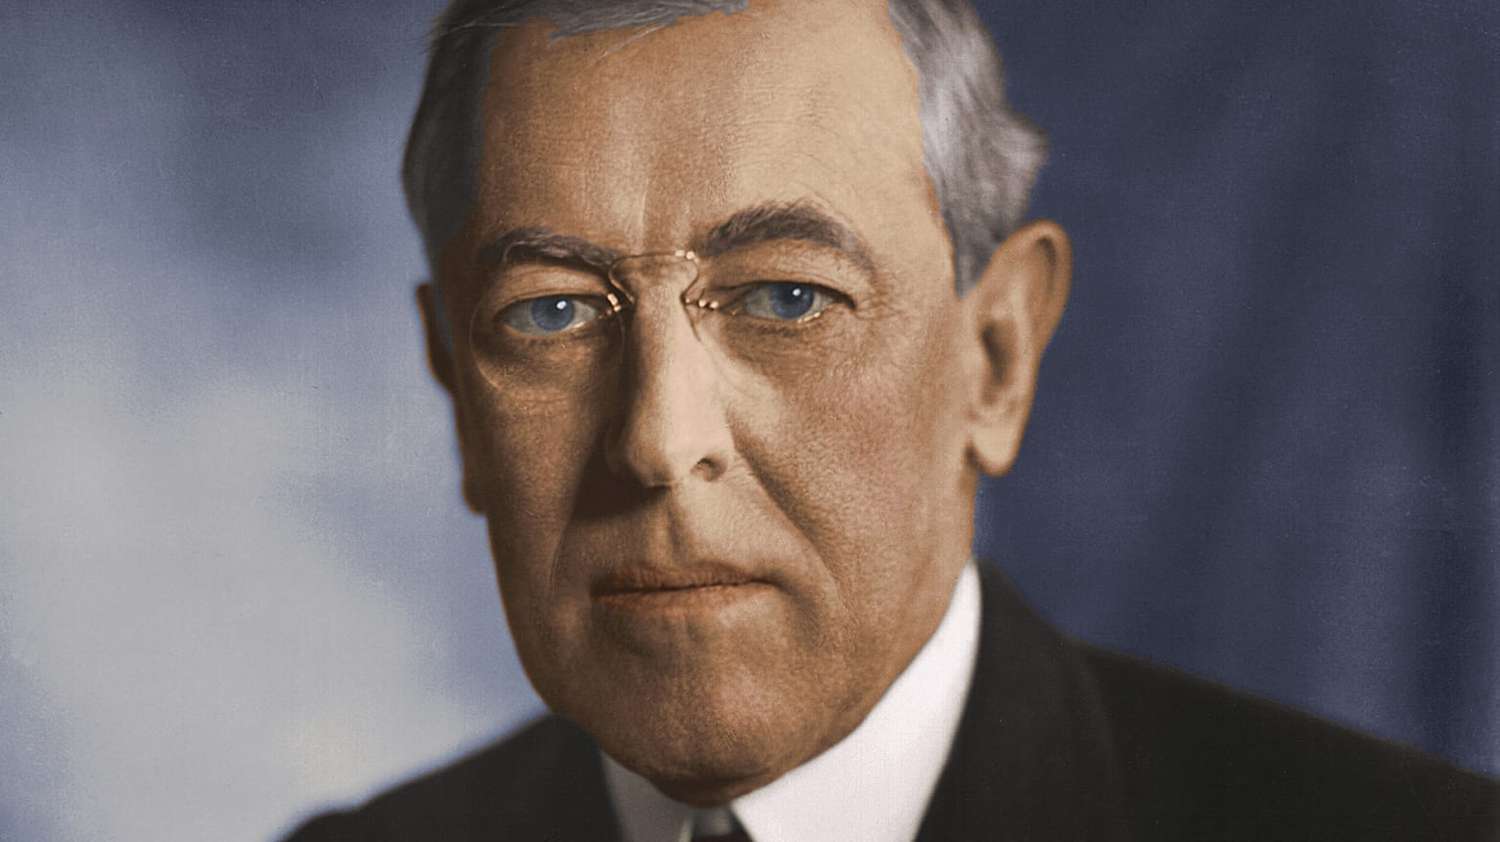 Woodrow Wilson, the 28th U.S. President, in a reflective pose.